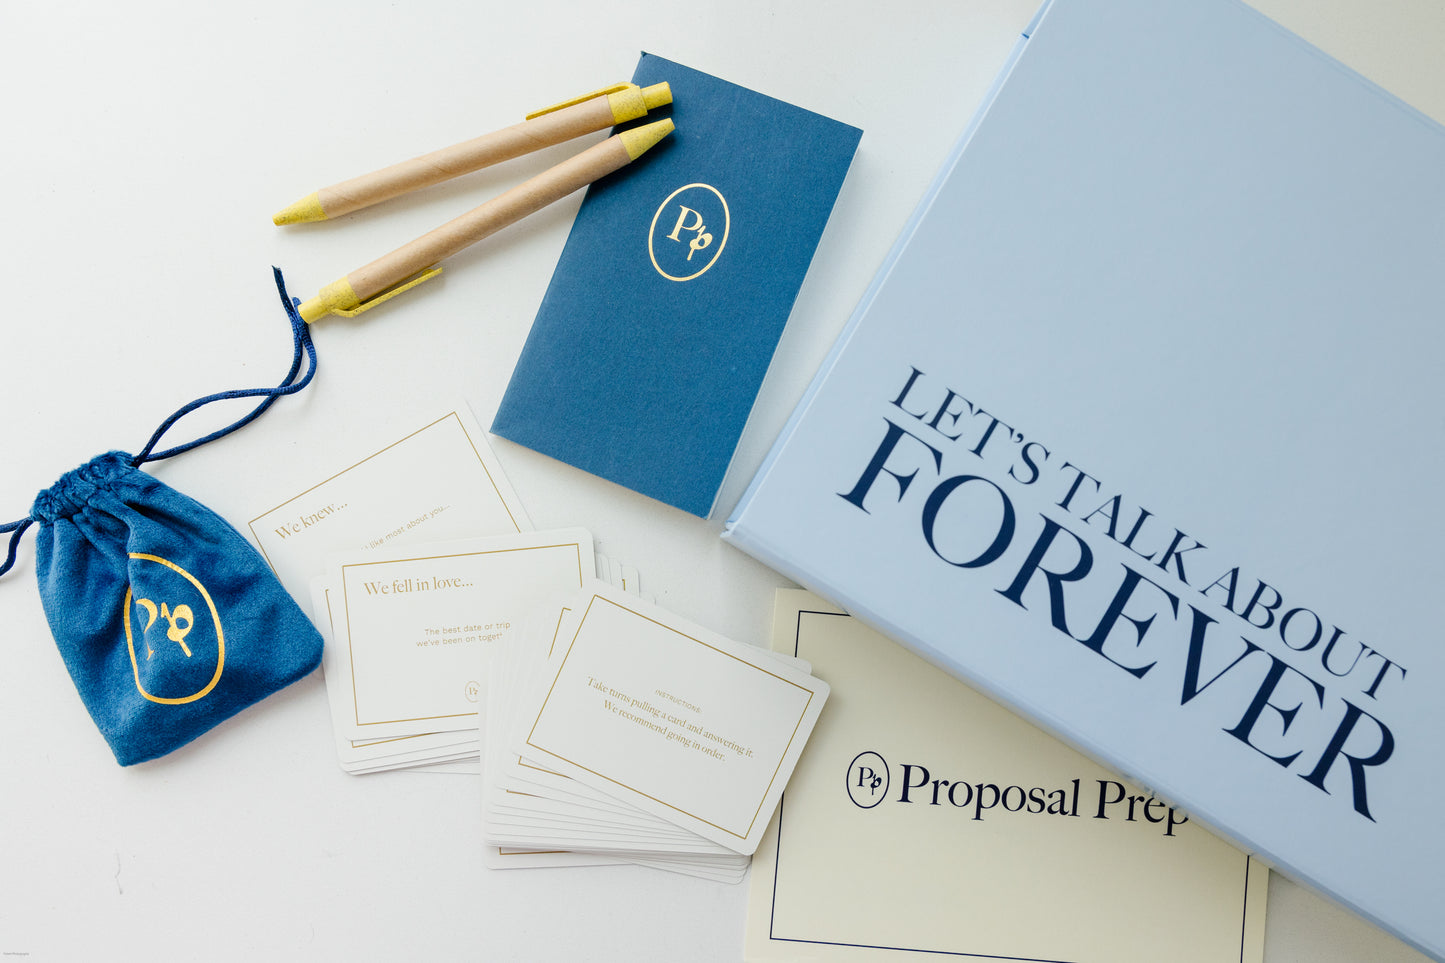 Proposal Prep Couples Box - Determine Your Dream Ring and Proposal